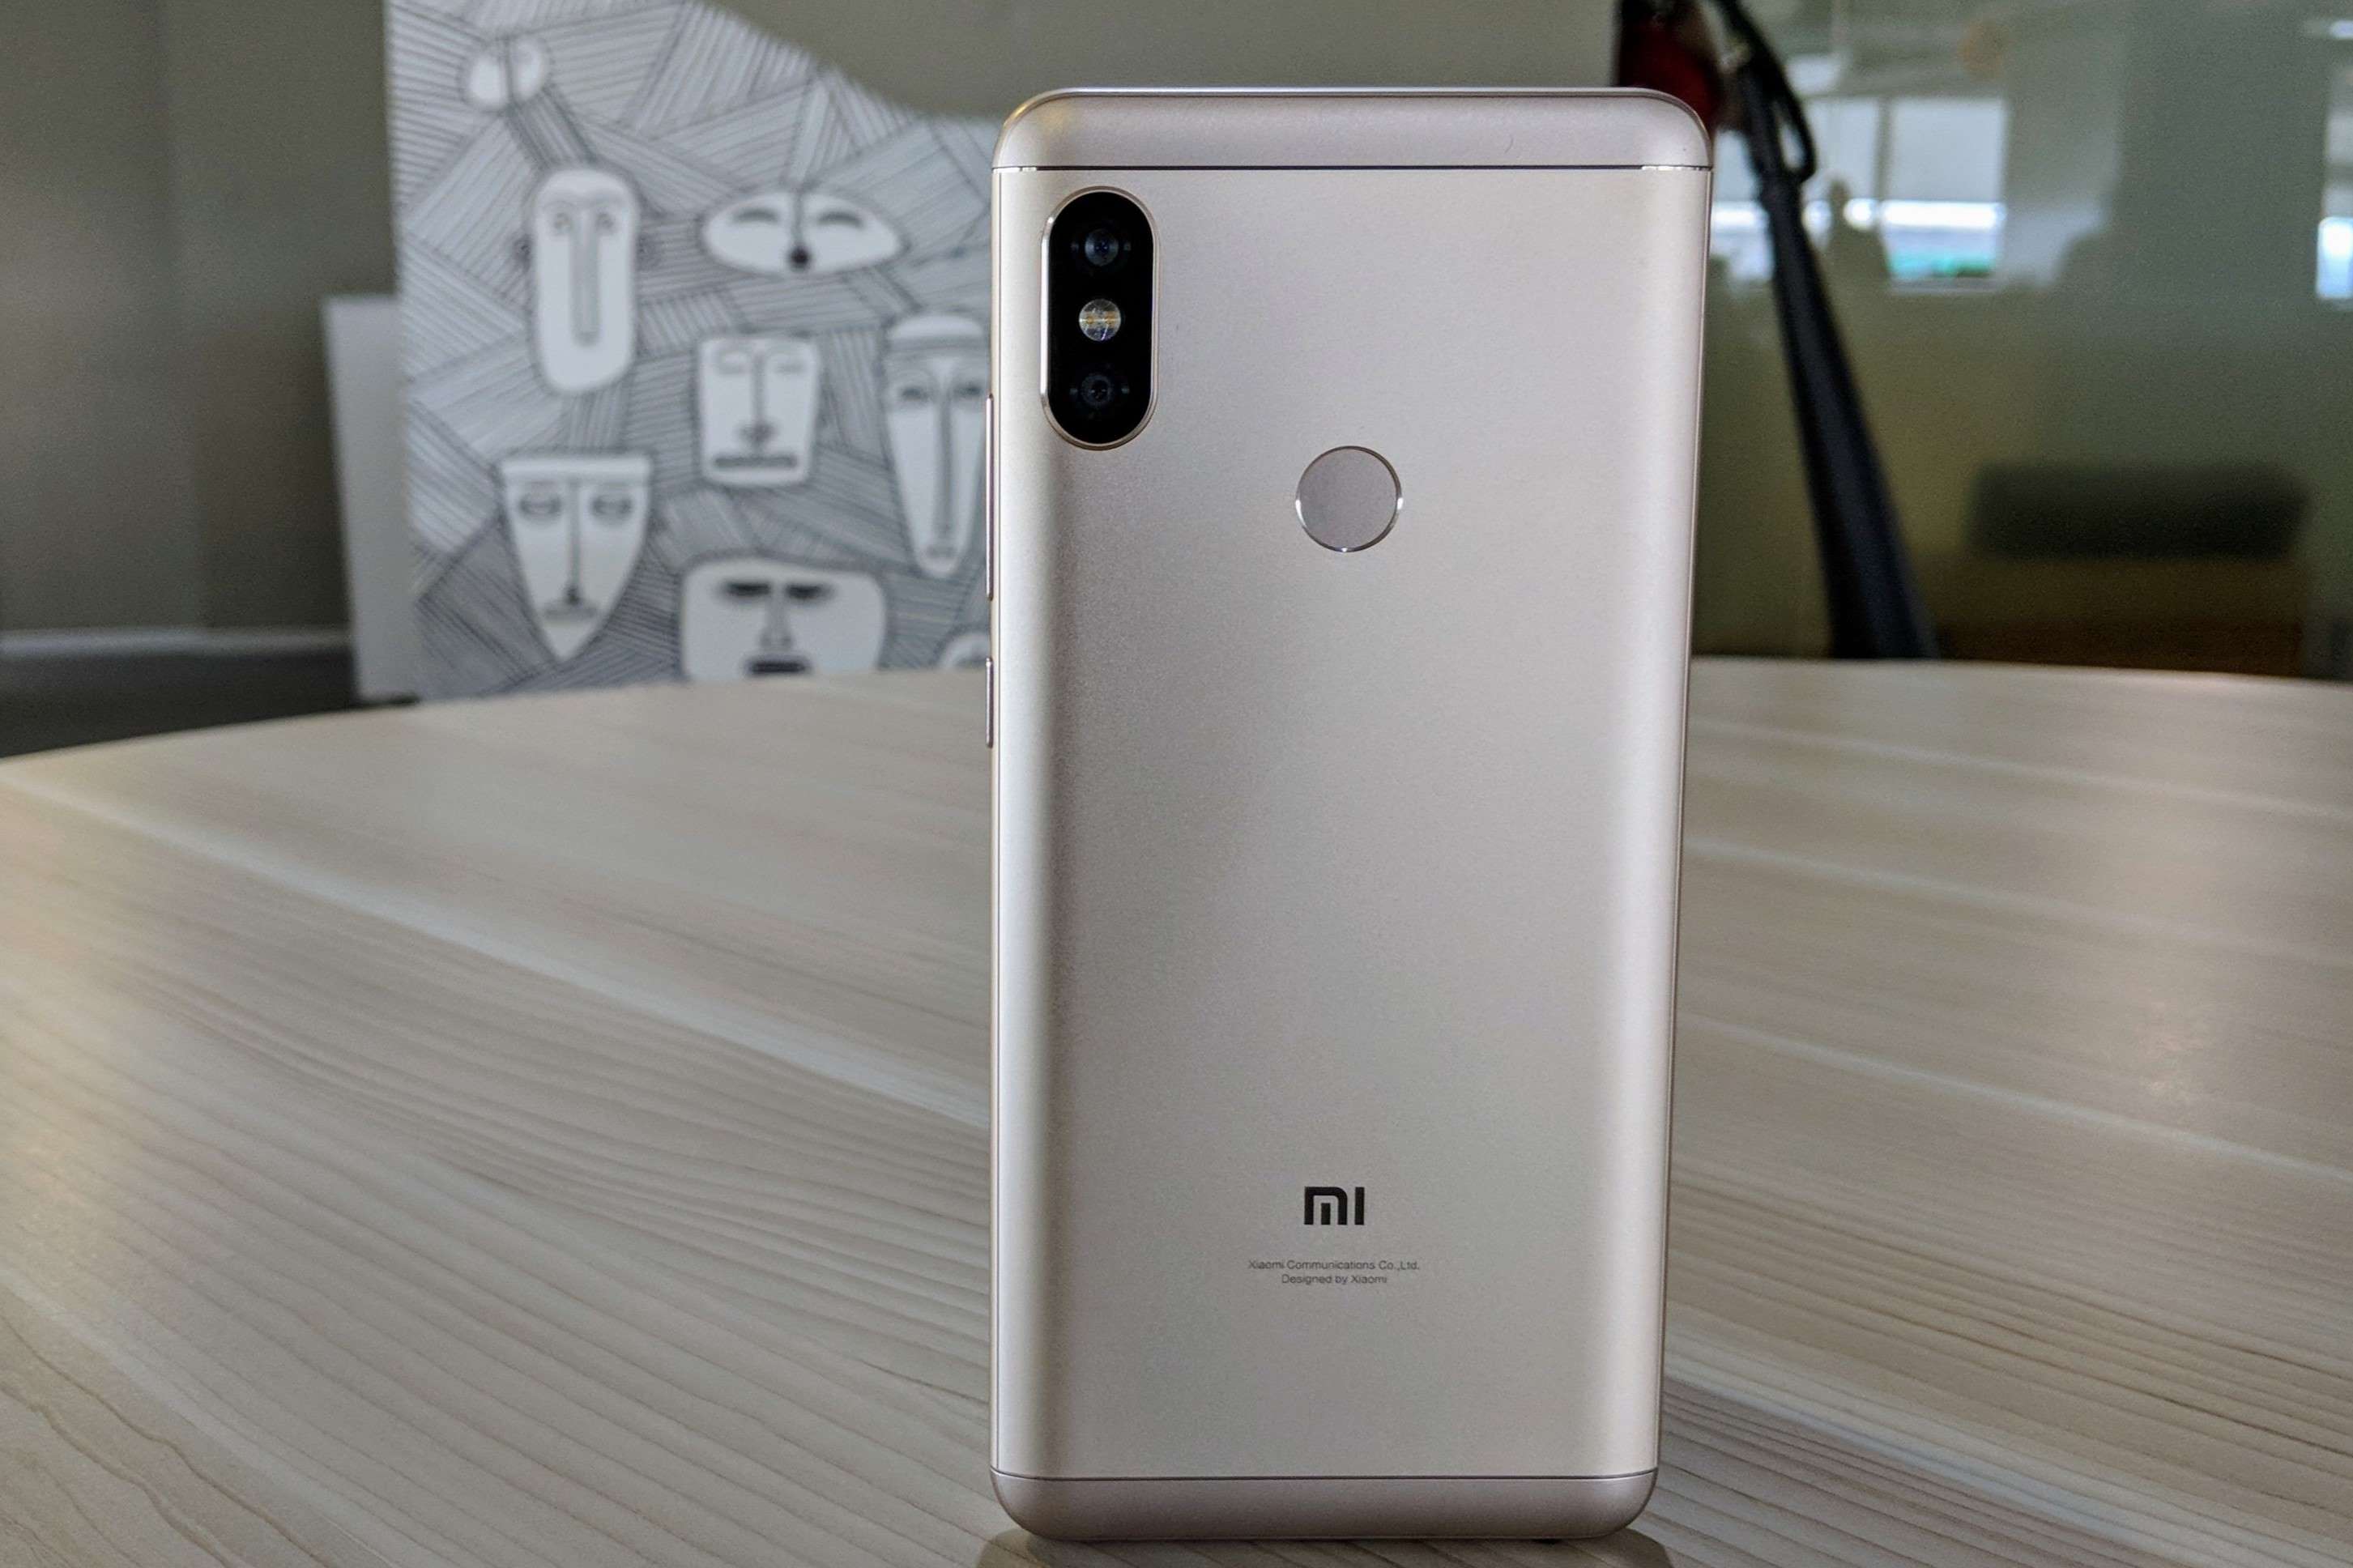 comprehensive-guide-getting-all-updates-on-redmi-note-5-pro